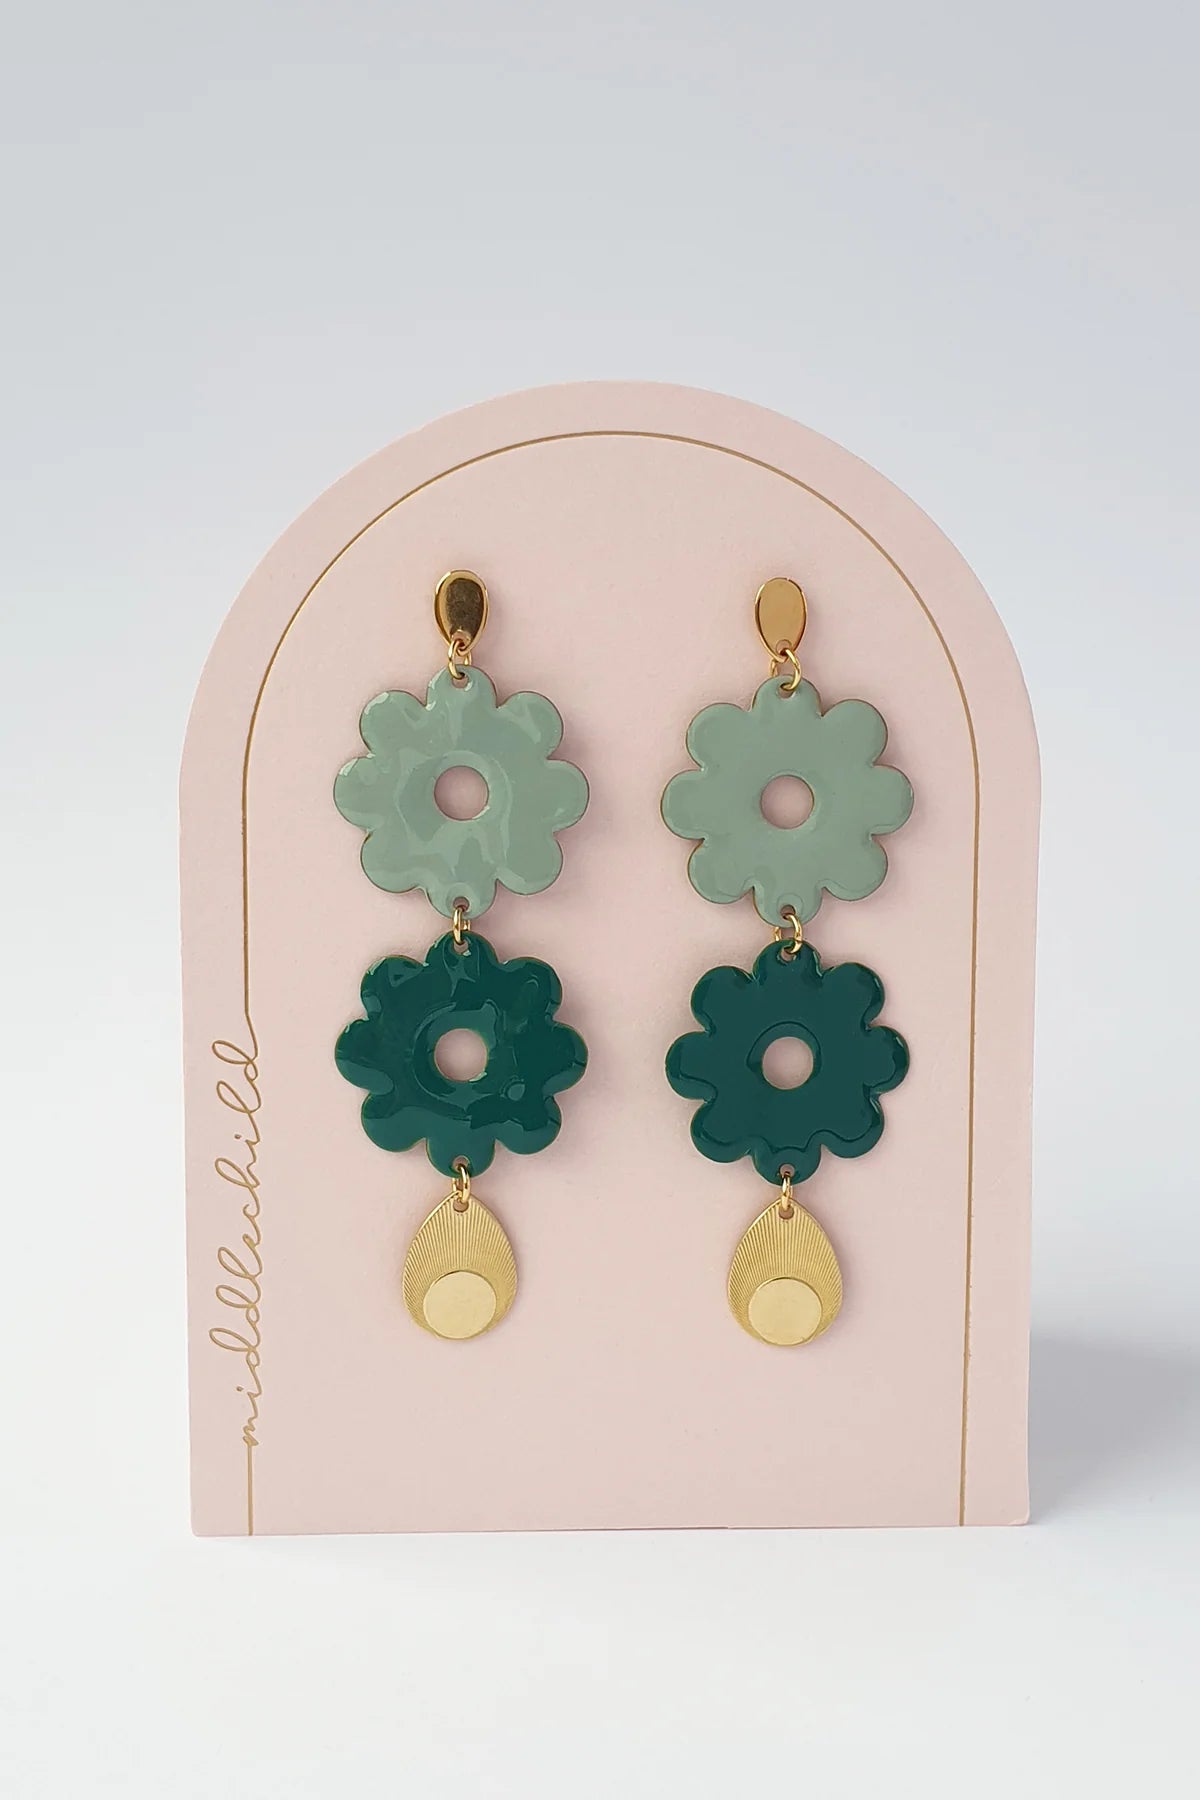 Middle Child - Pamper Earrings